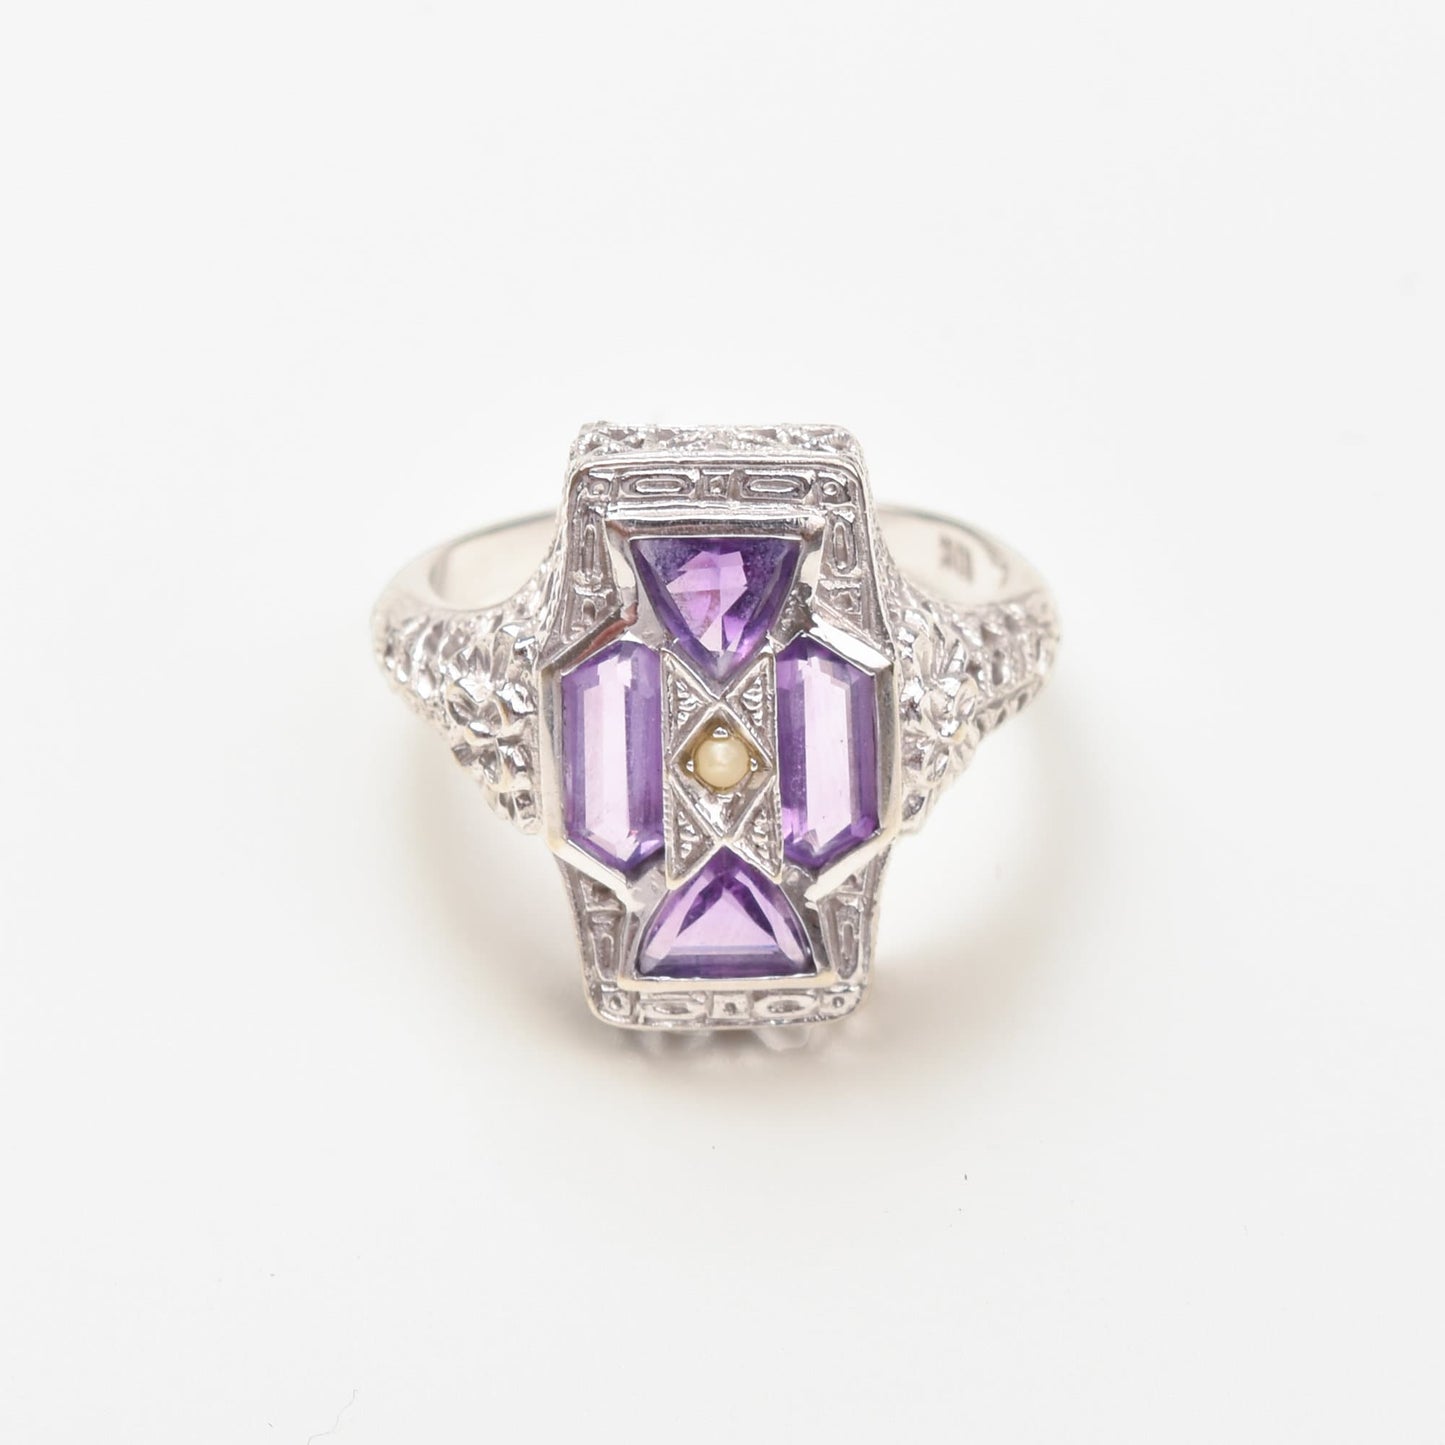 Art Deco 4-Stone Amethyst Seed Pearl Filigree Ring In 10K White Gold, Antique Dinner Ring, Size 6 3/4 US